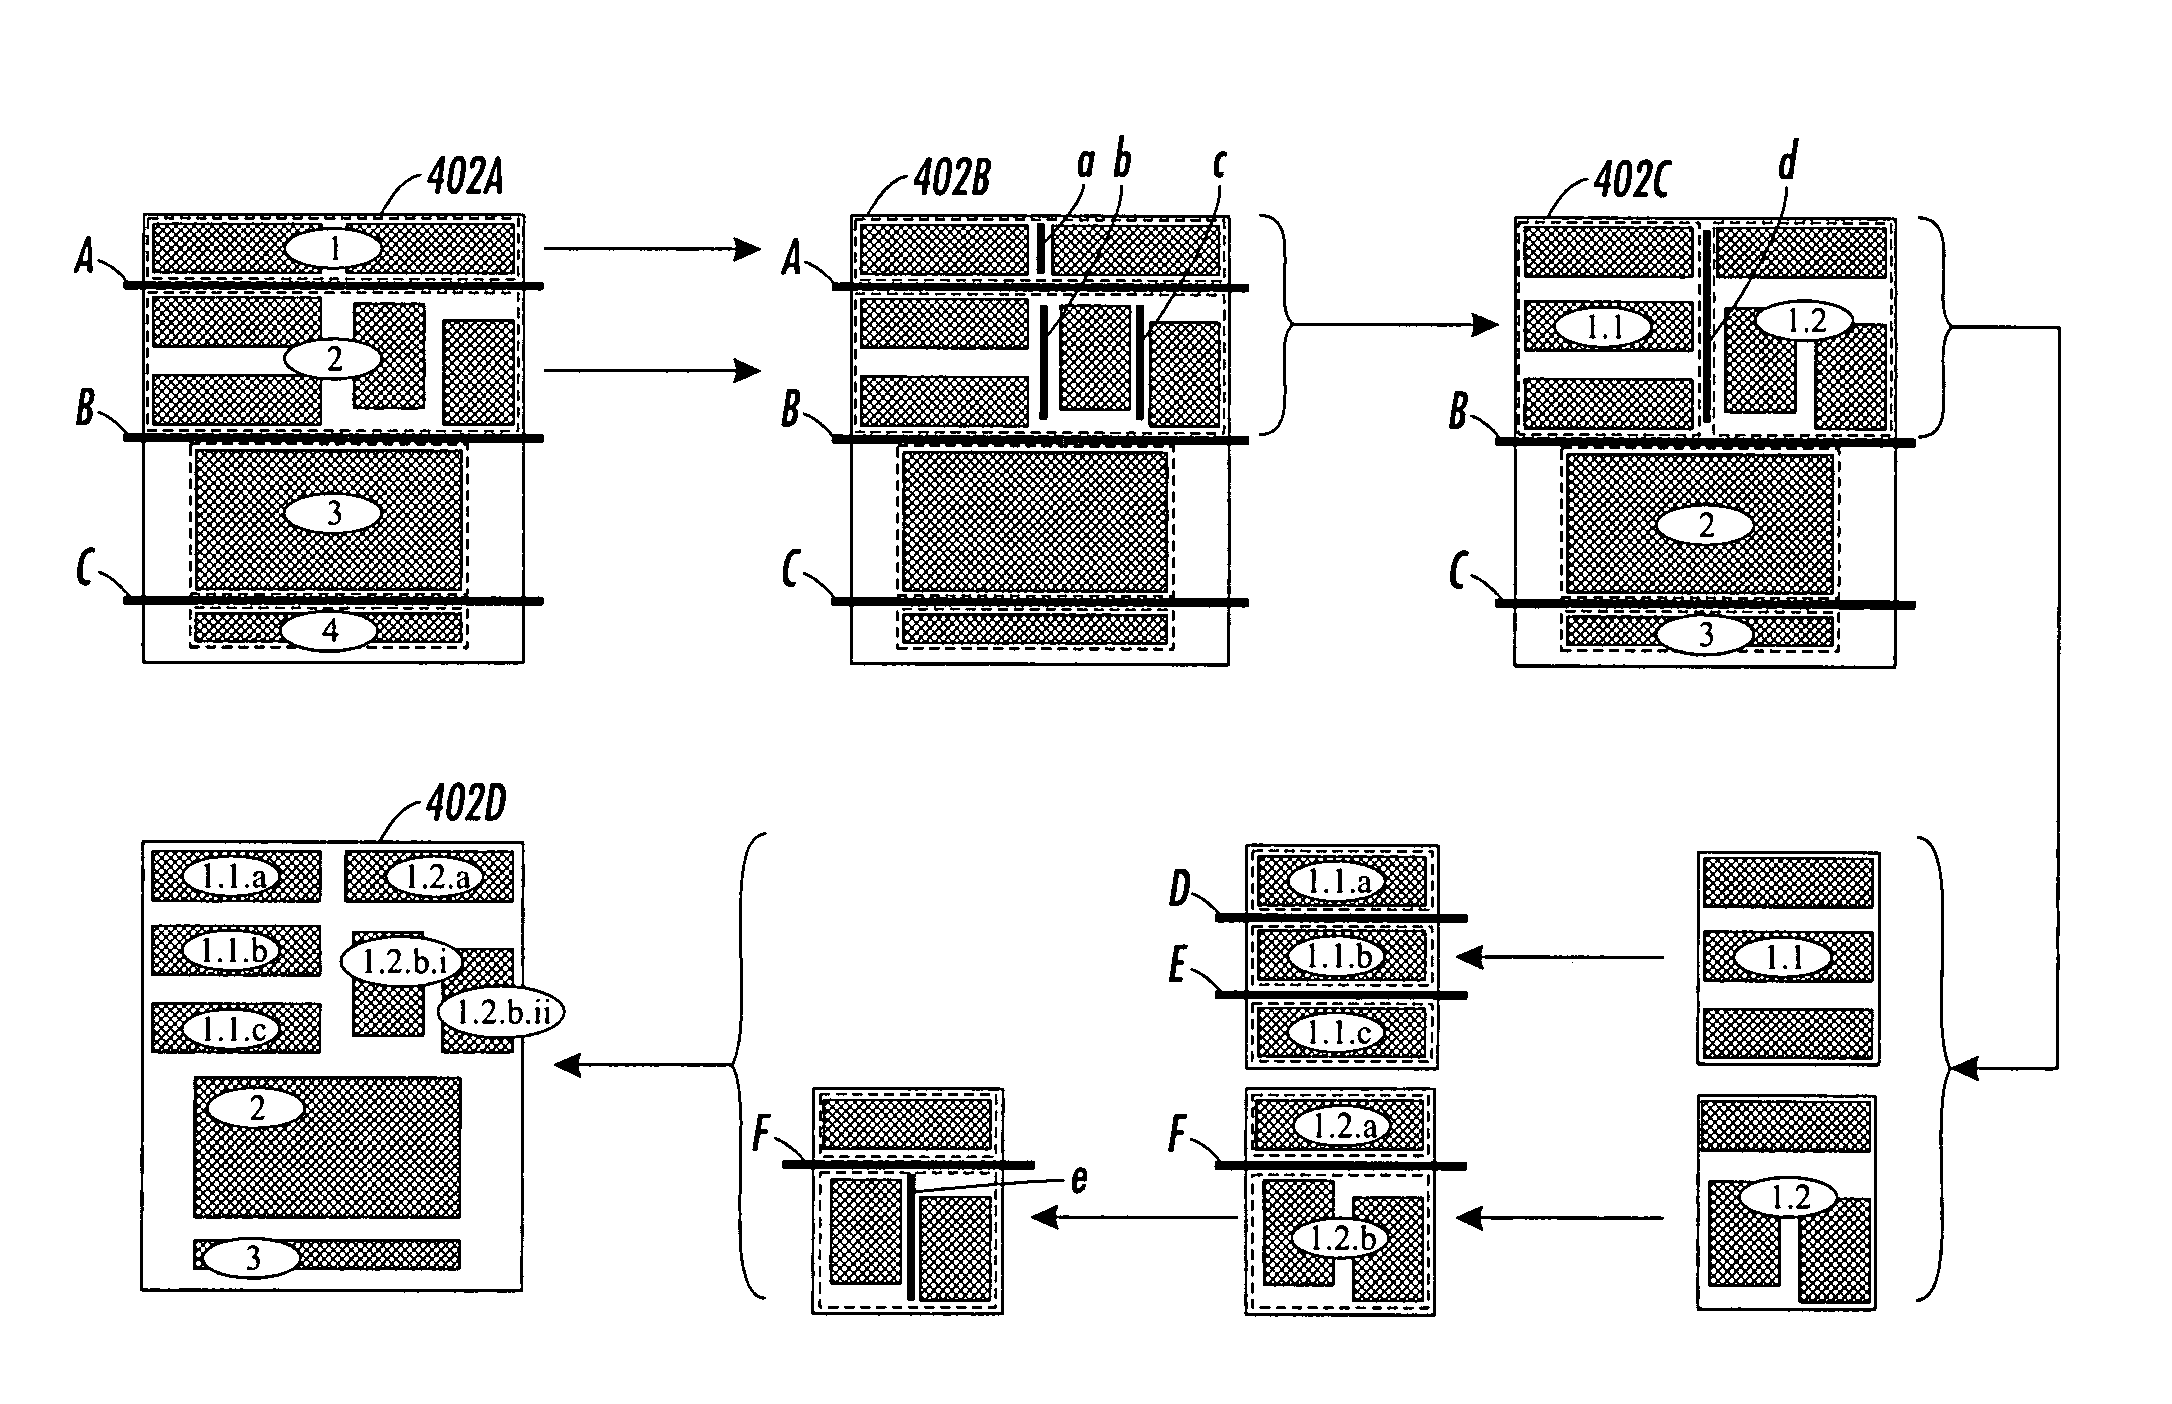 Method and apparatus for determining logical document structure